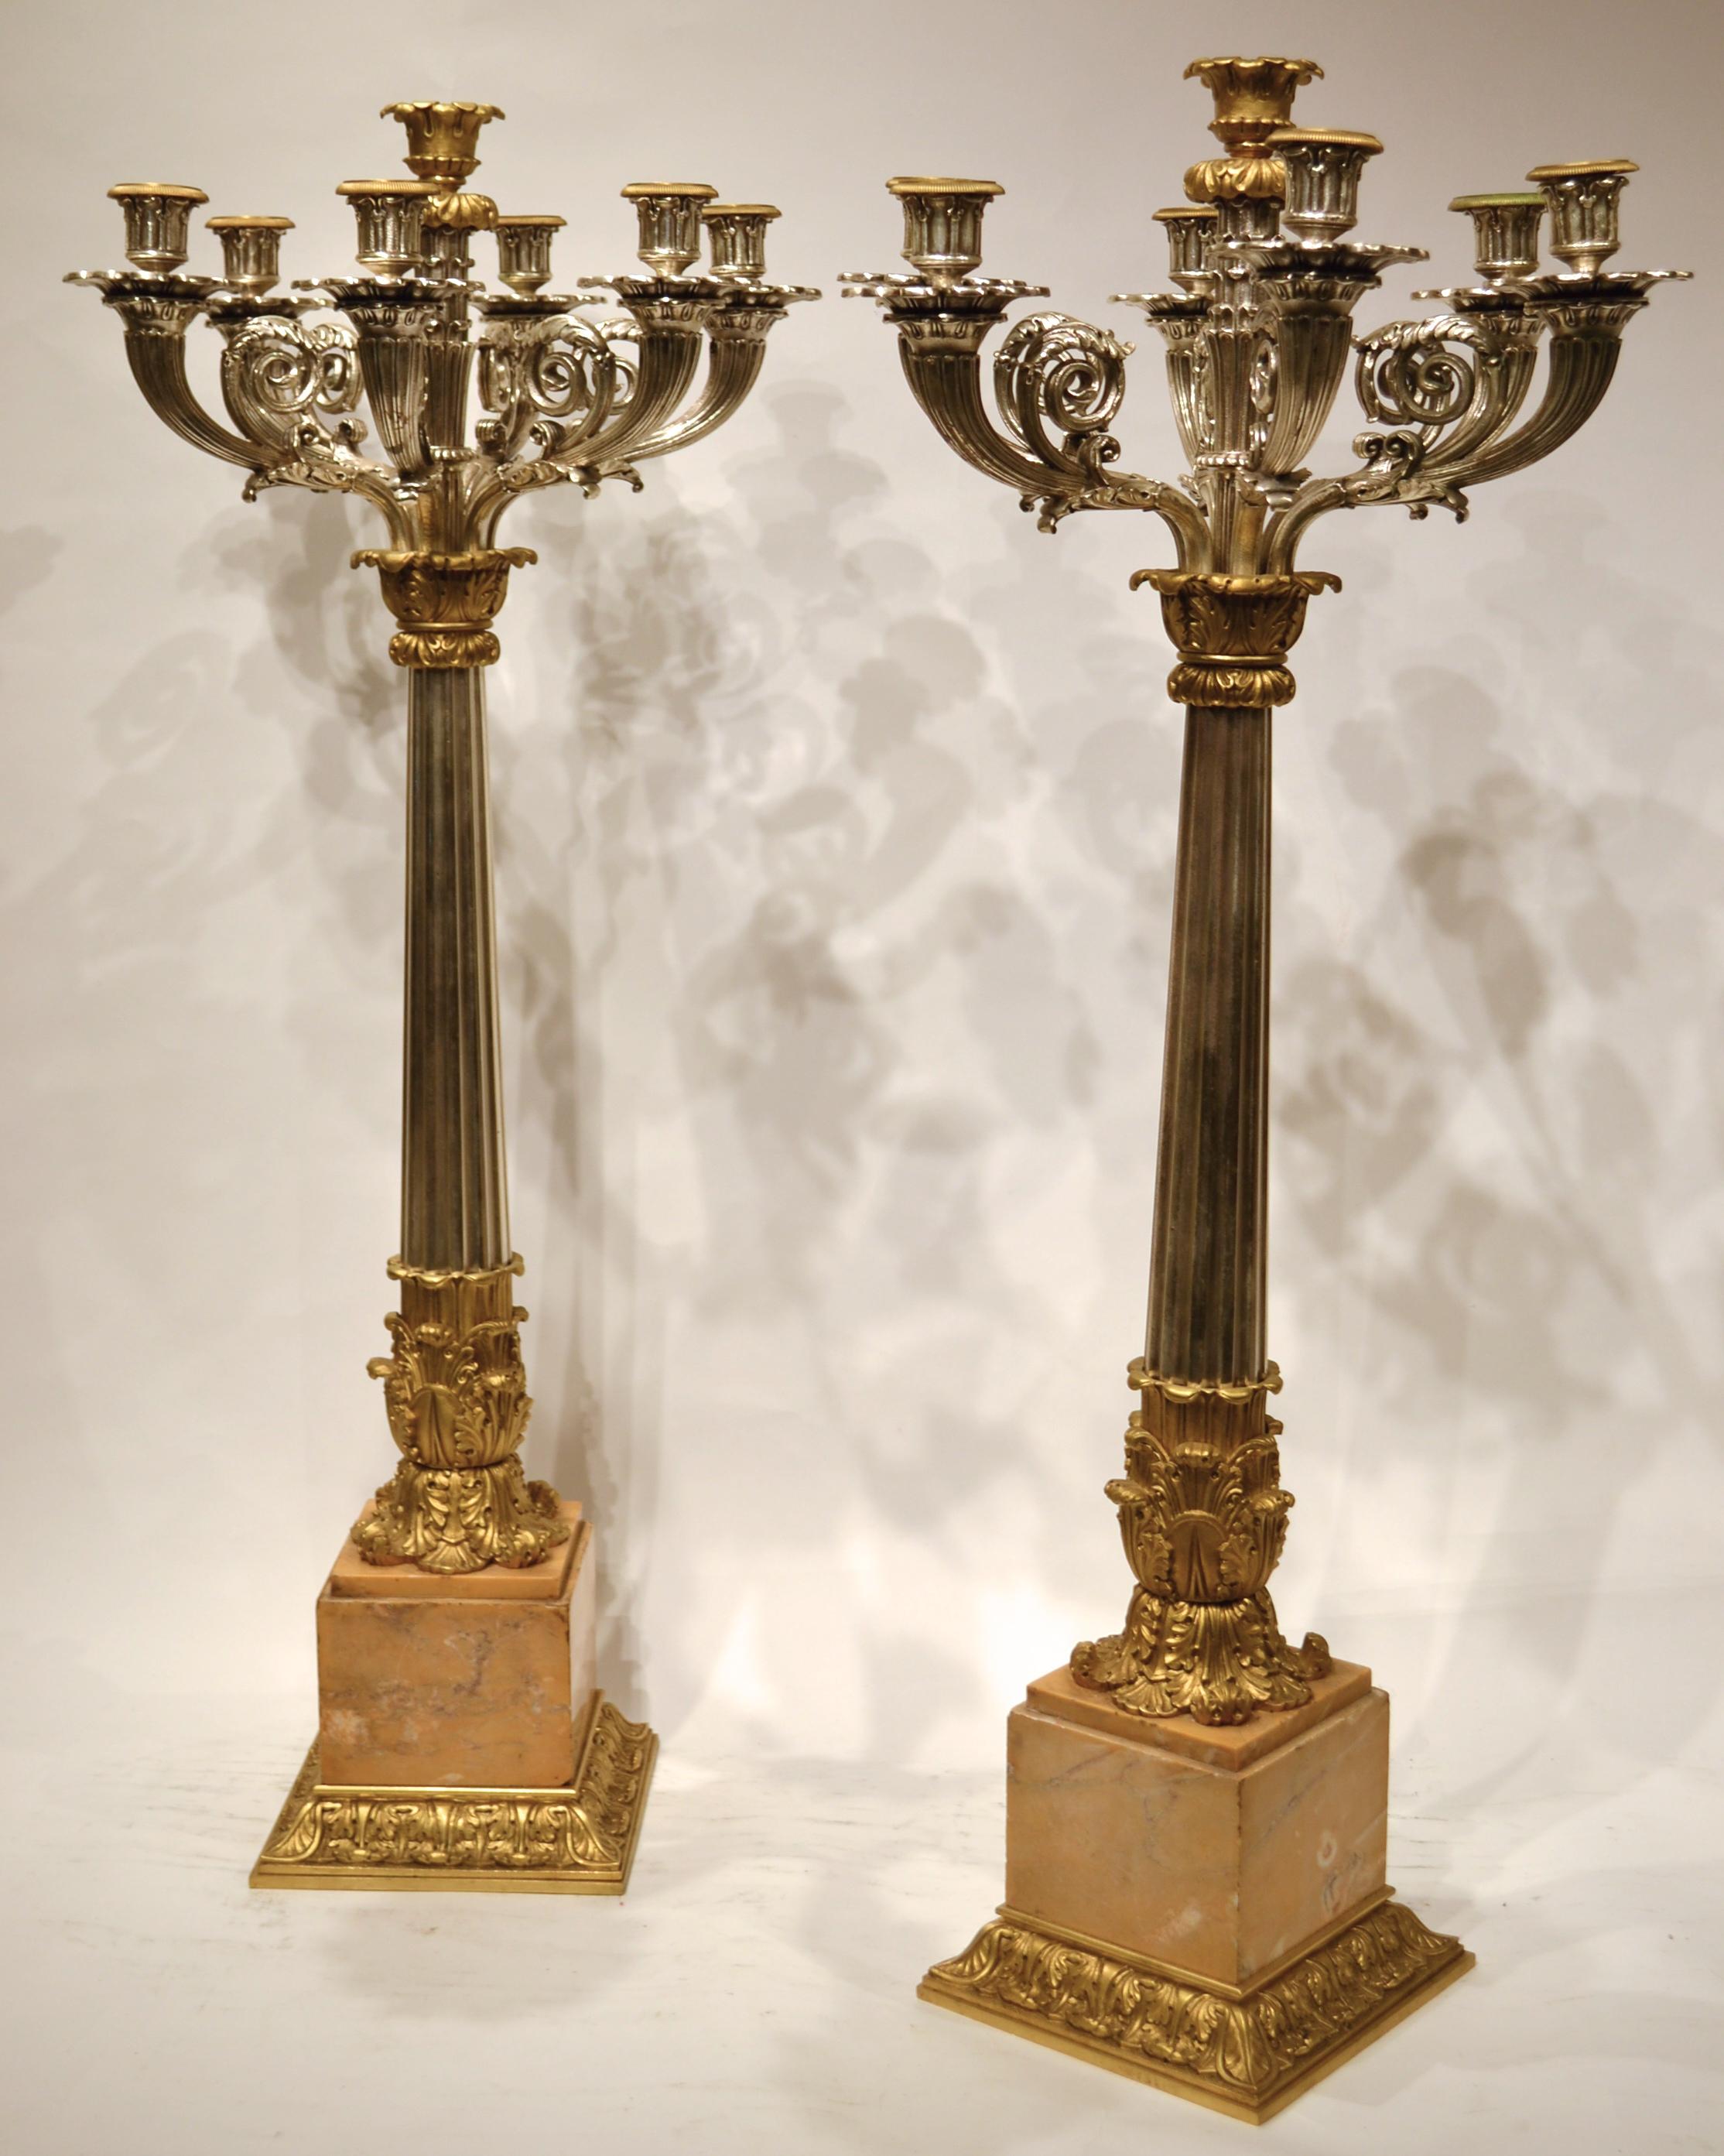 Pair of Empire Style Silvered and Gilt Bronze Candelabra with Marble Bases For Sale 3